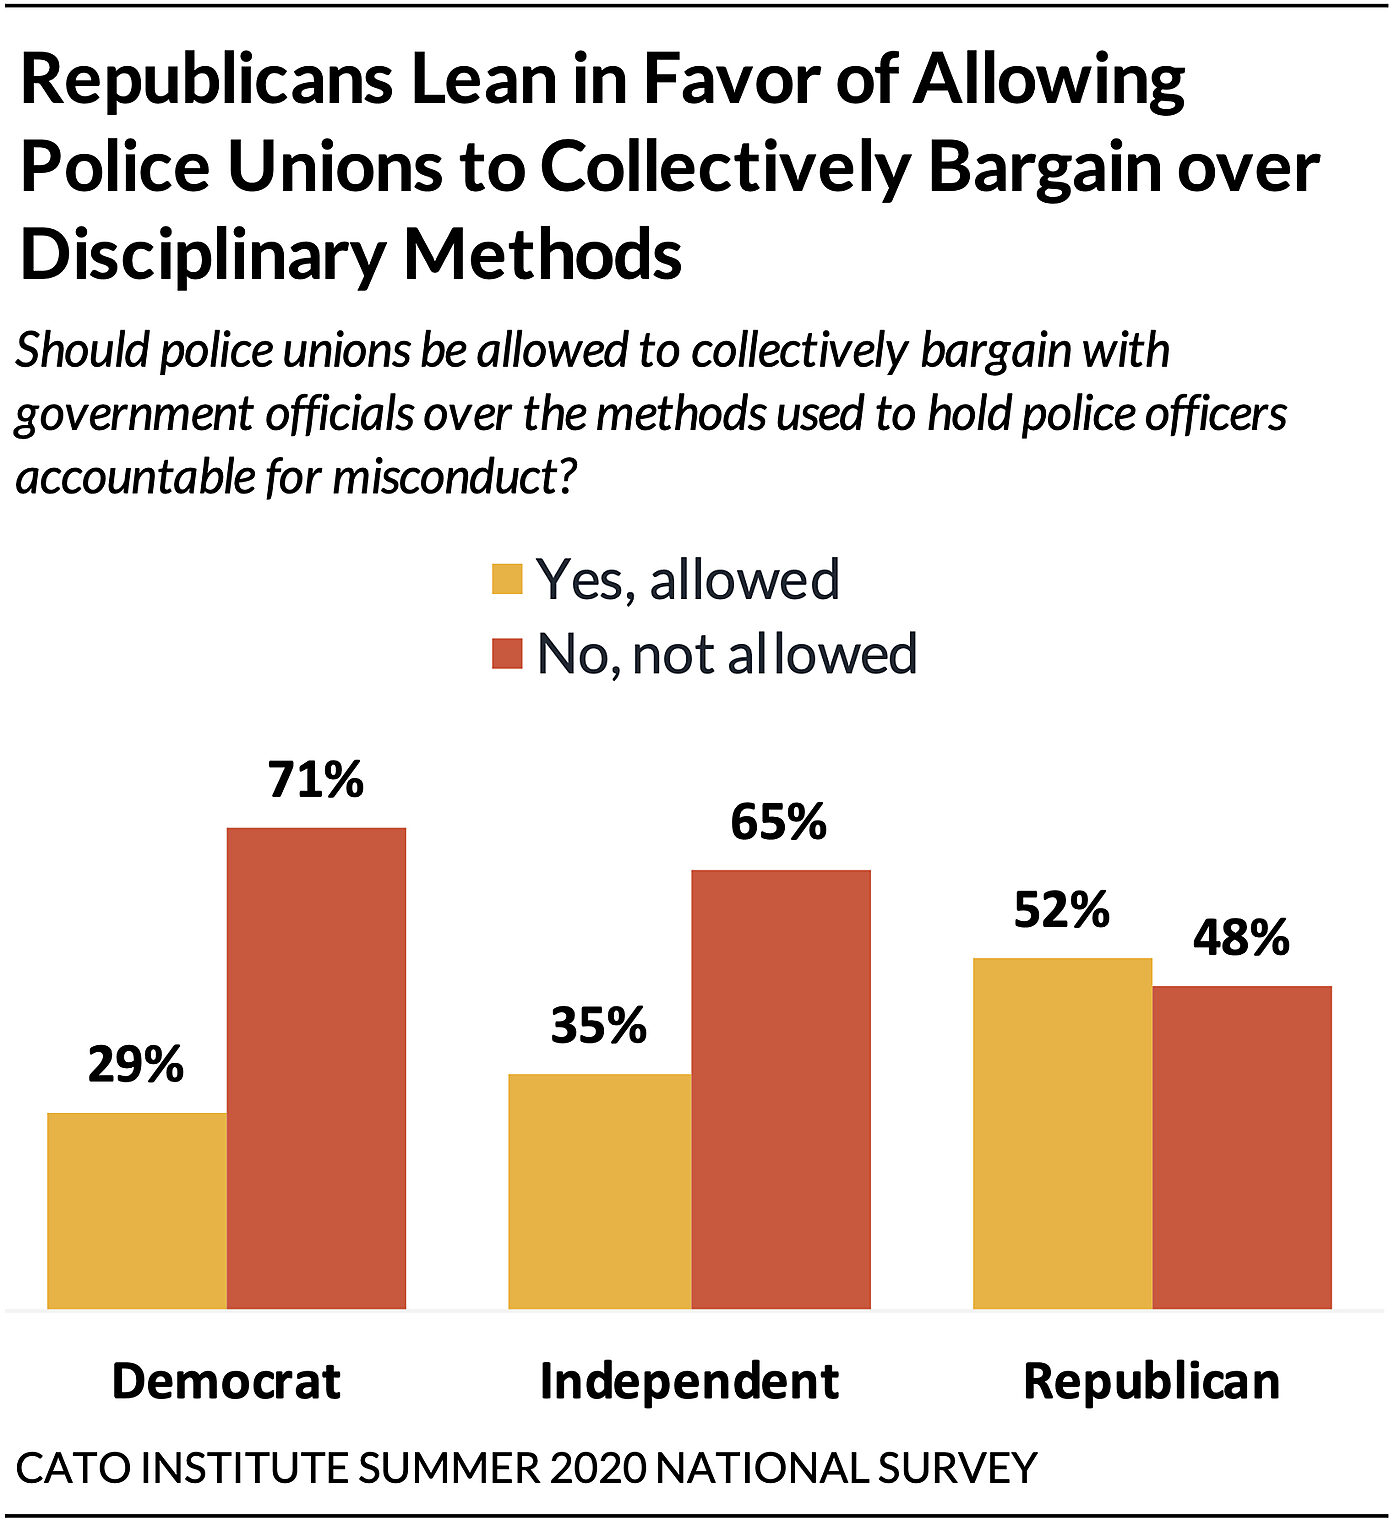 Republicans Lean in Favor of Allowing Police Unions to Collectively Bargain over Disciplinary Methods